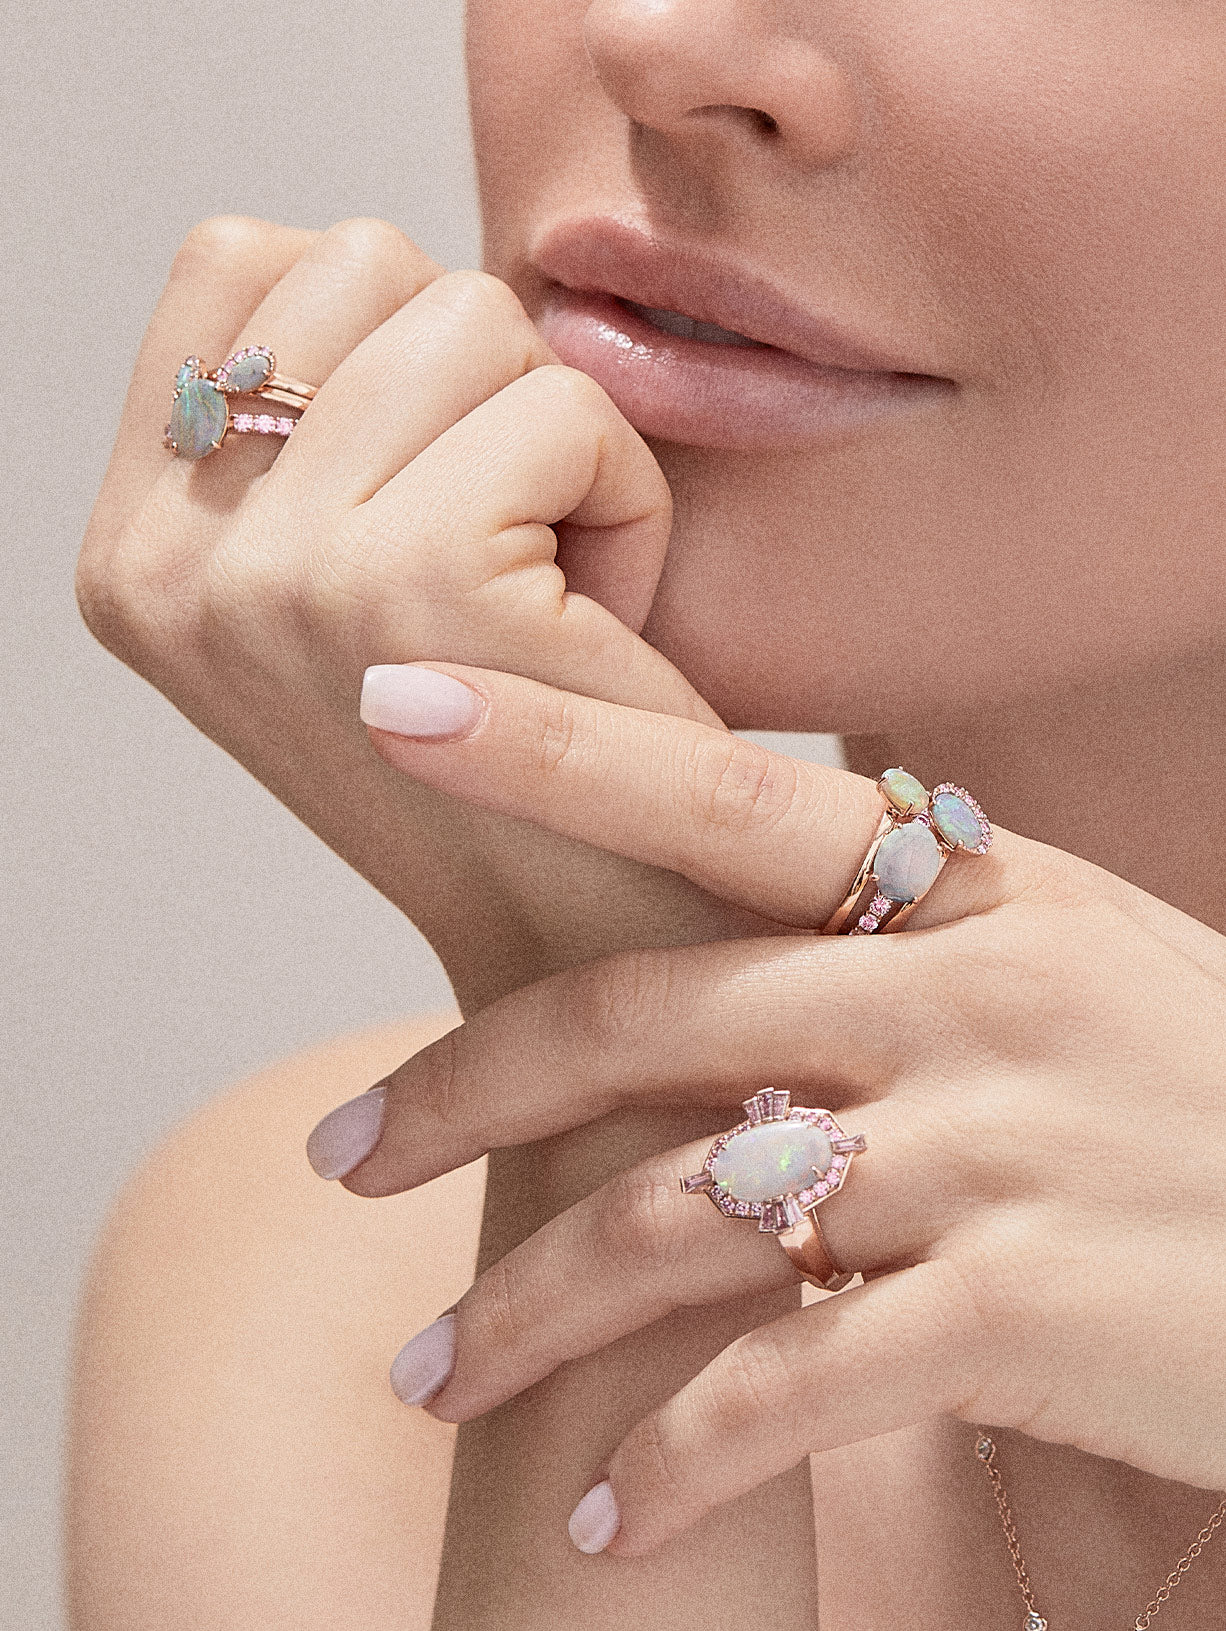 Argyle Pink™ Diamond and Opal Stacking Ring - Pink Diamonds, J FINE - J Fine, Rings - Pink Diamond Jewelry, argyle-pink™-diamond-and-opal-stacking-ring-by-j-fine - Argyle Pink Diamonds